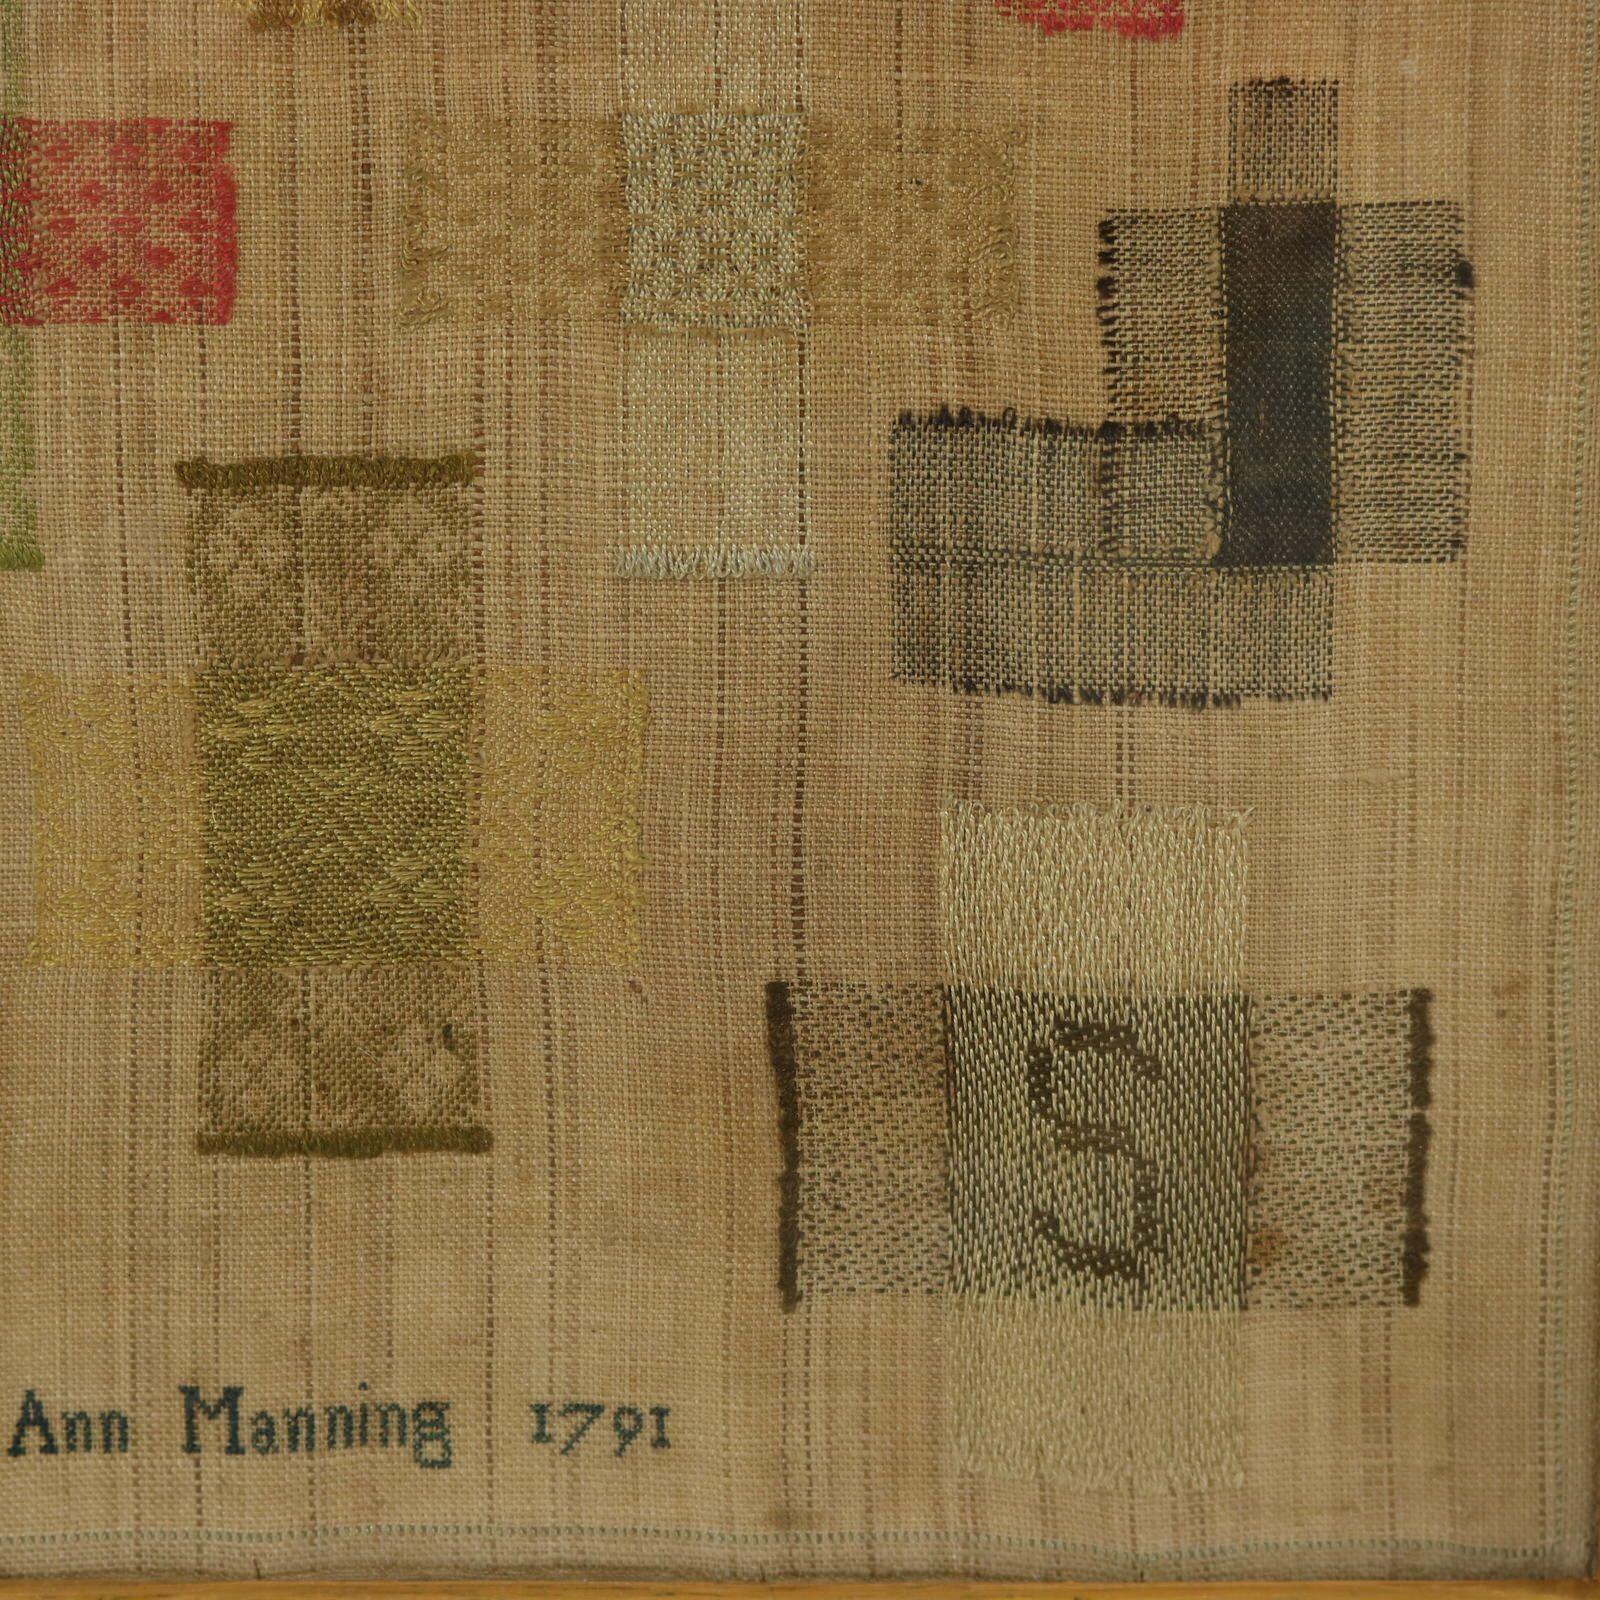 Late 18th Century Antique Darning Sampler, 1791, by Ann Manning For Sale